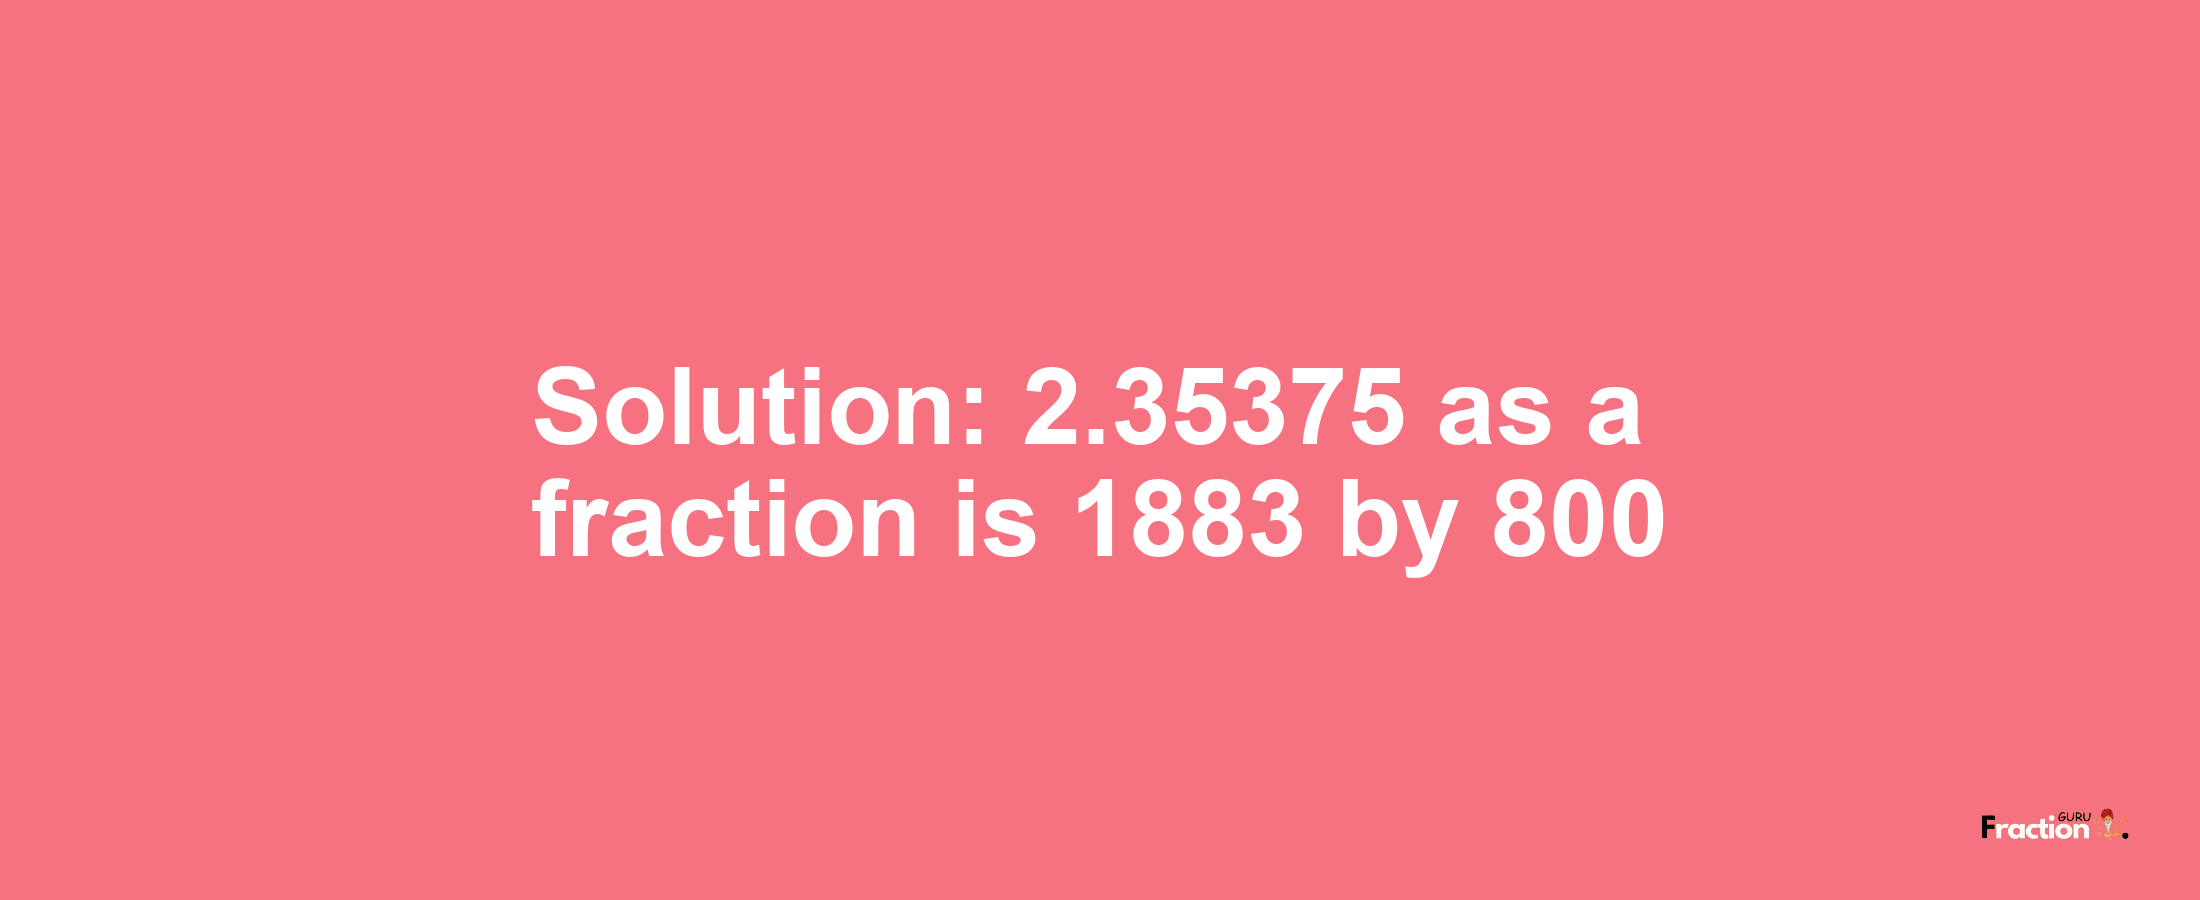 Solution:2.35375 as a fraction is 1883/800